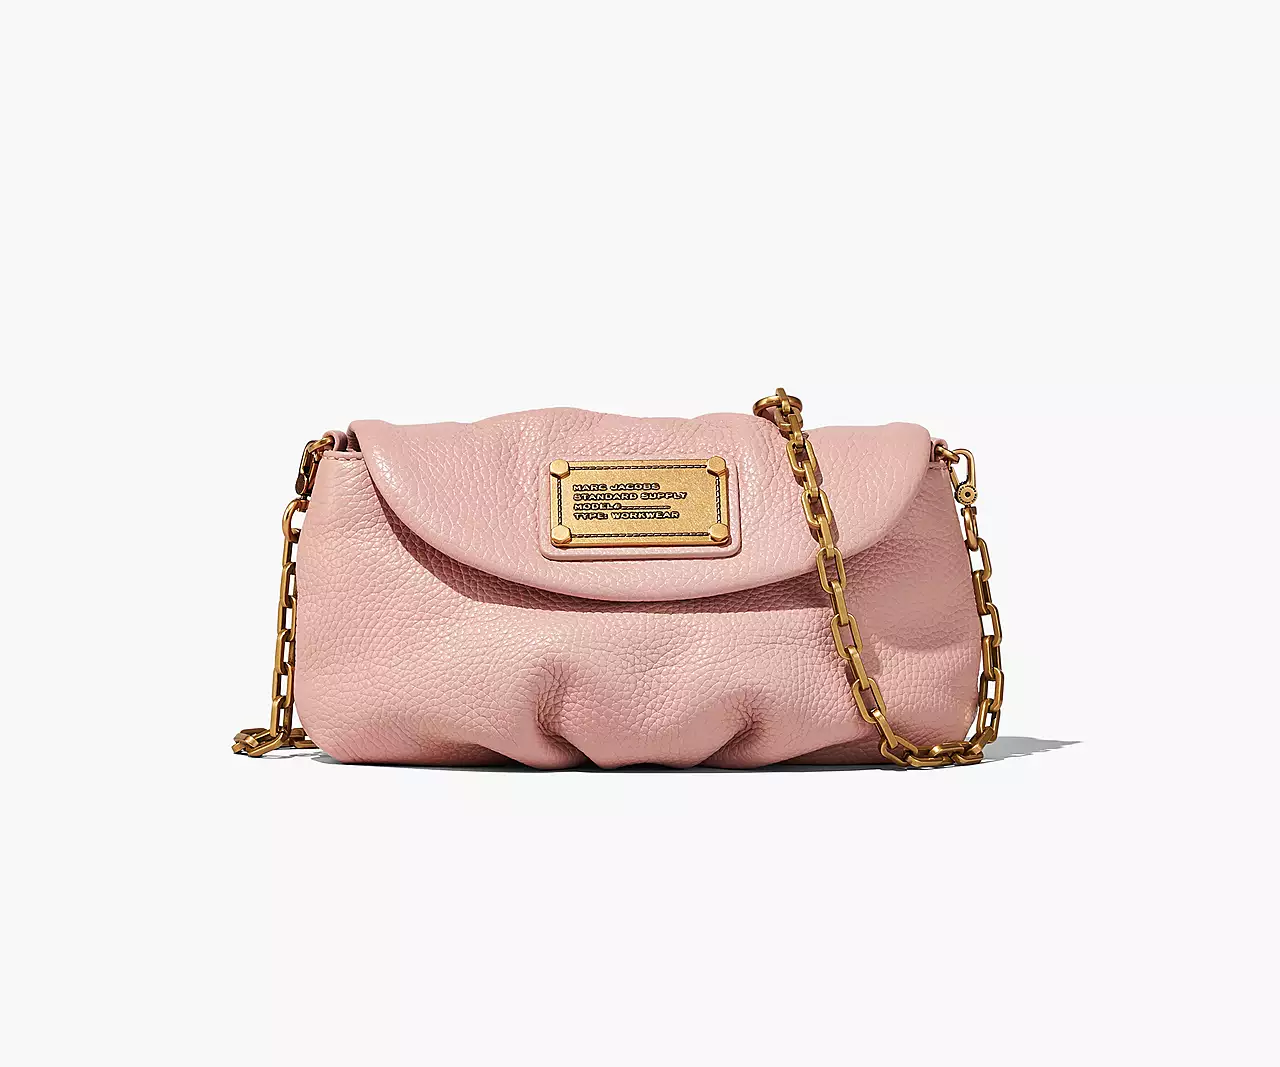 Marc Jacobs Re-Edition Karlie New Rose Pebble Leather Bag H164L03FA22